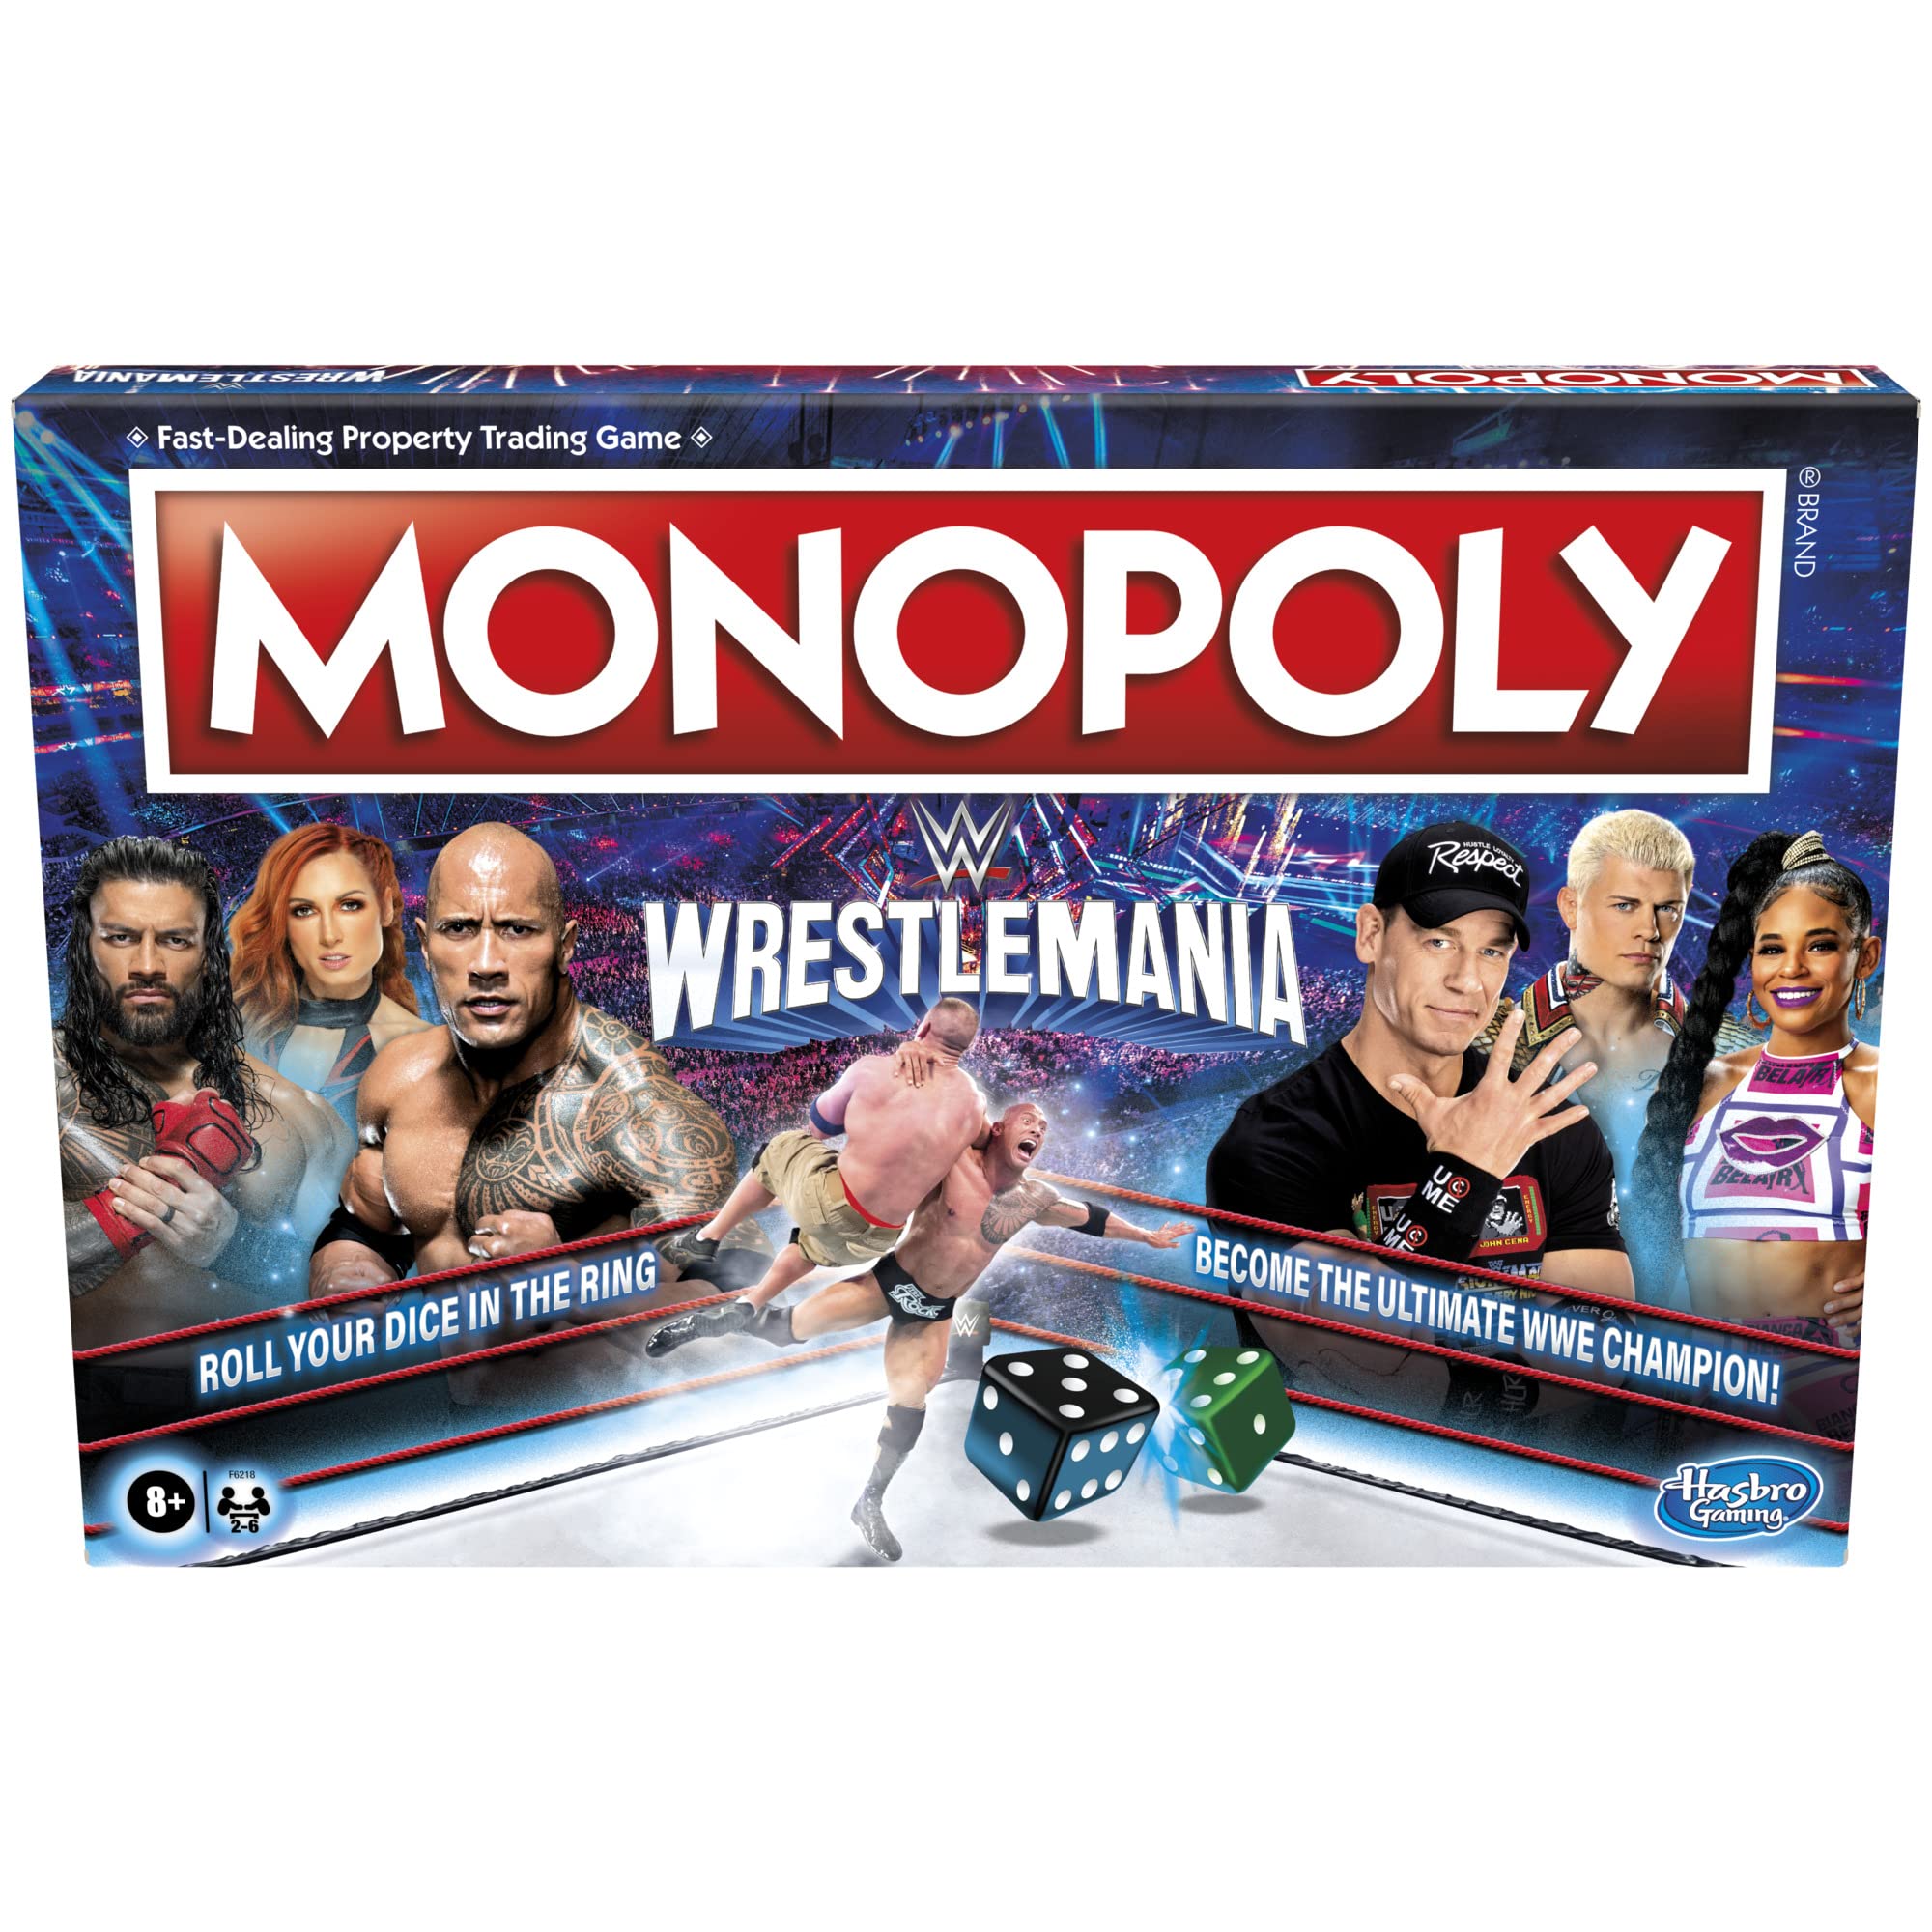 Monopoly: Wrestlemania Edition Board Game for Ages 8 and up, Monopoly Game Inspired by WWE Wrestlemania, Family Games for 2-6 Players, Kids Games